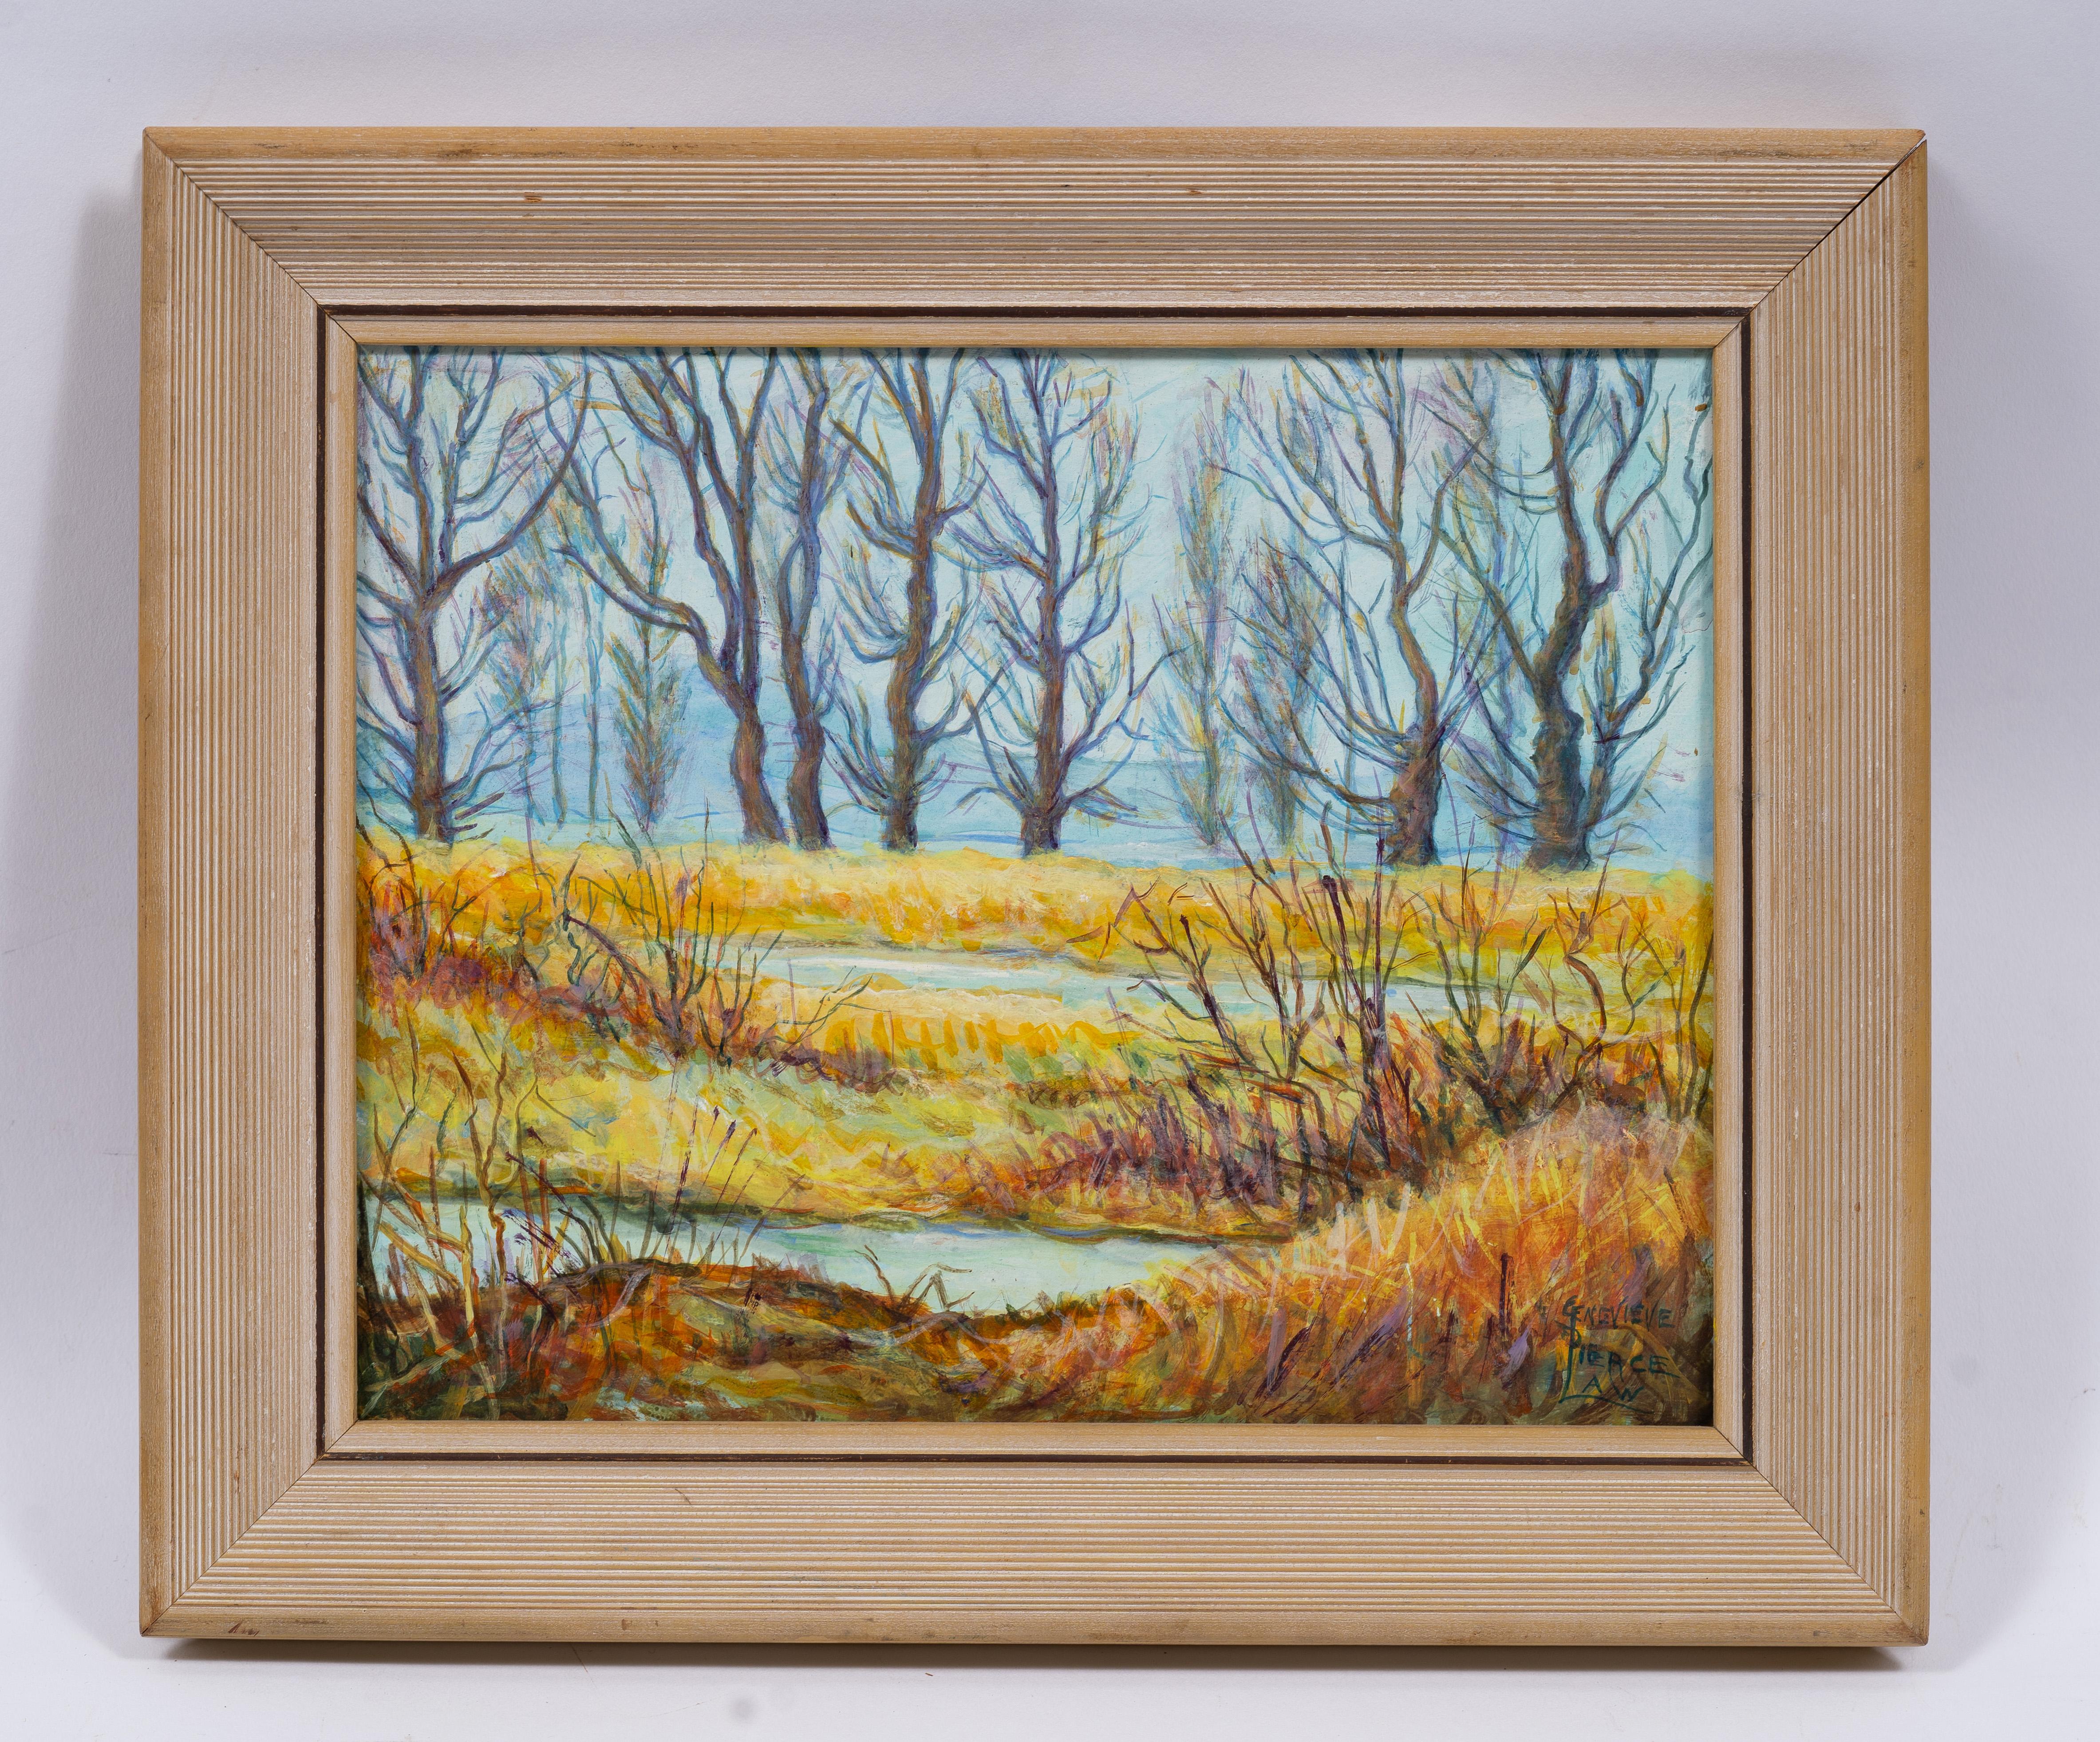 Antique American impressionist landscape painting by Genevieve Pierce Law (1906-1995).  Oil on board.  Framed.  Signed.